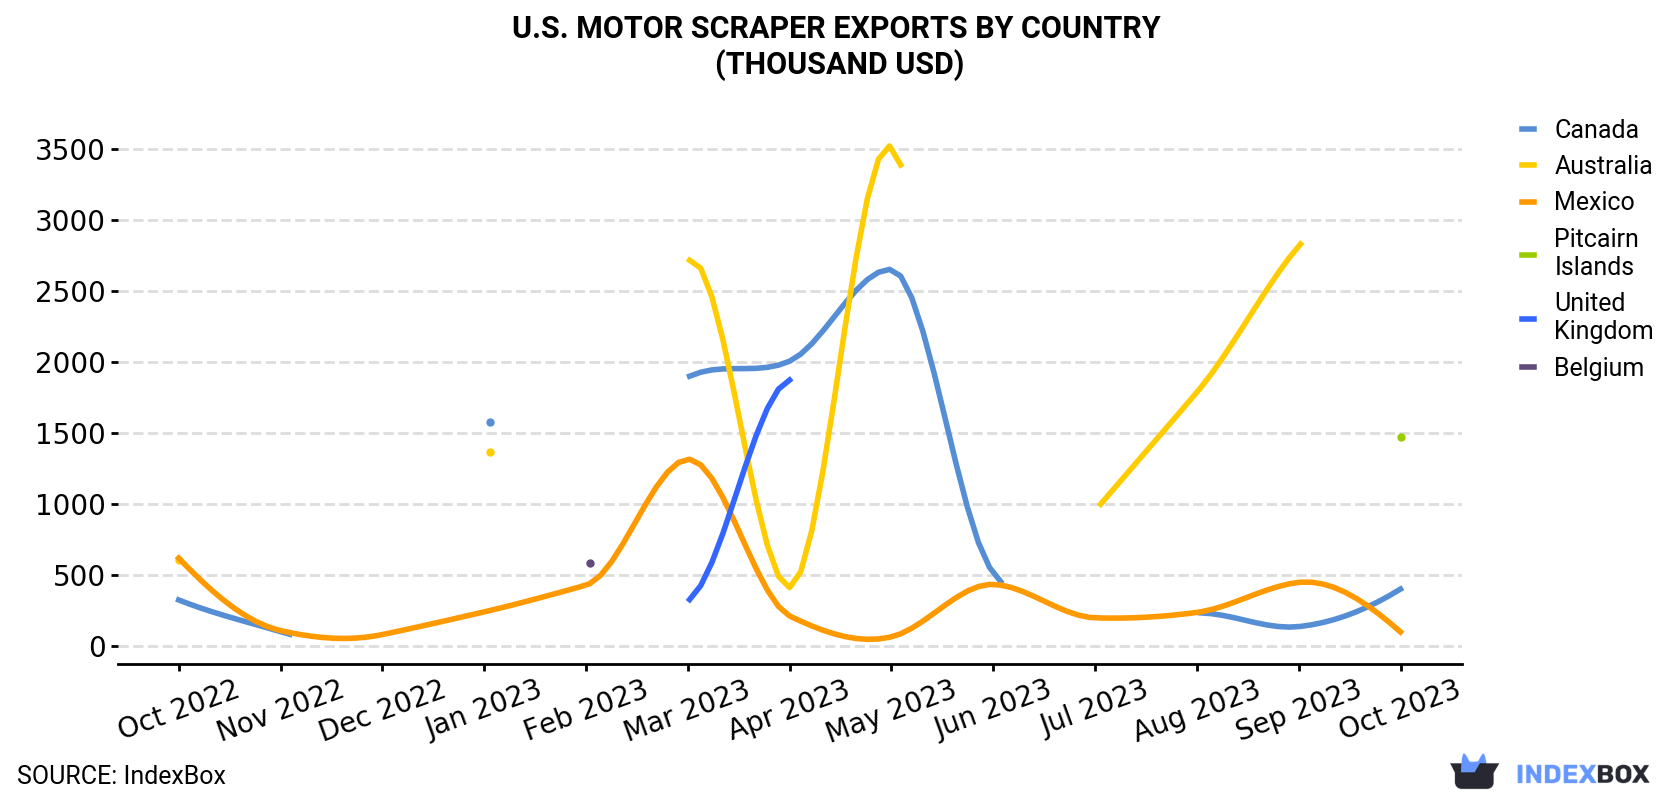 U.S. Motor Scraper Exports By Country (Thousand USD)